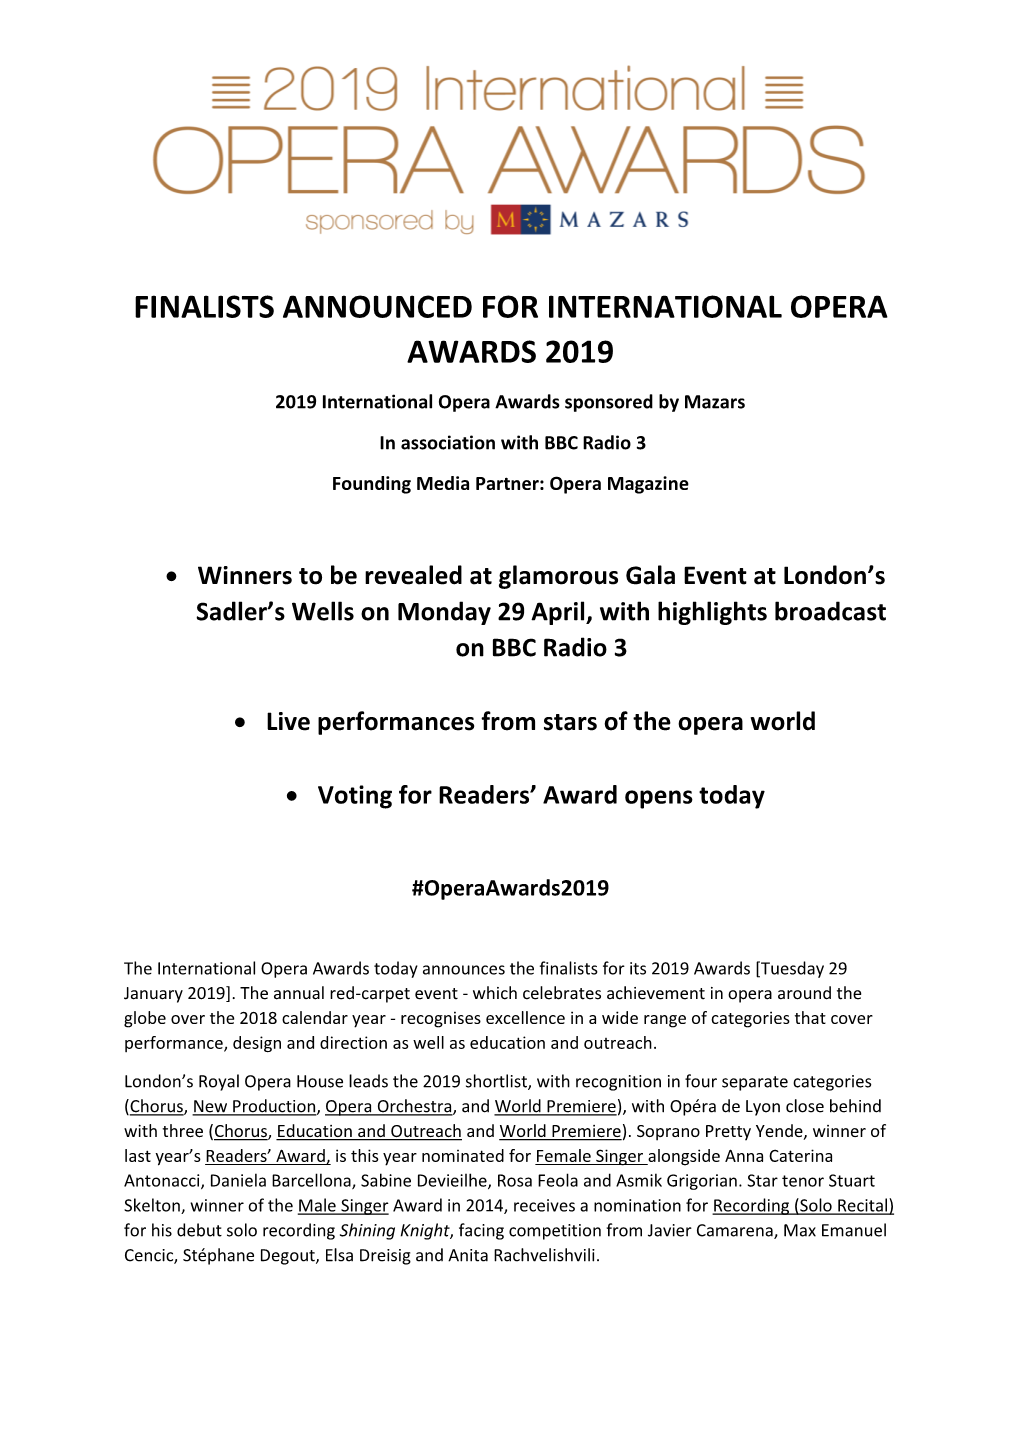 Finalists Announced for International Opera Awards 2019